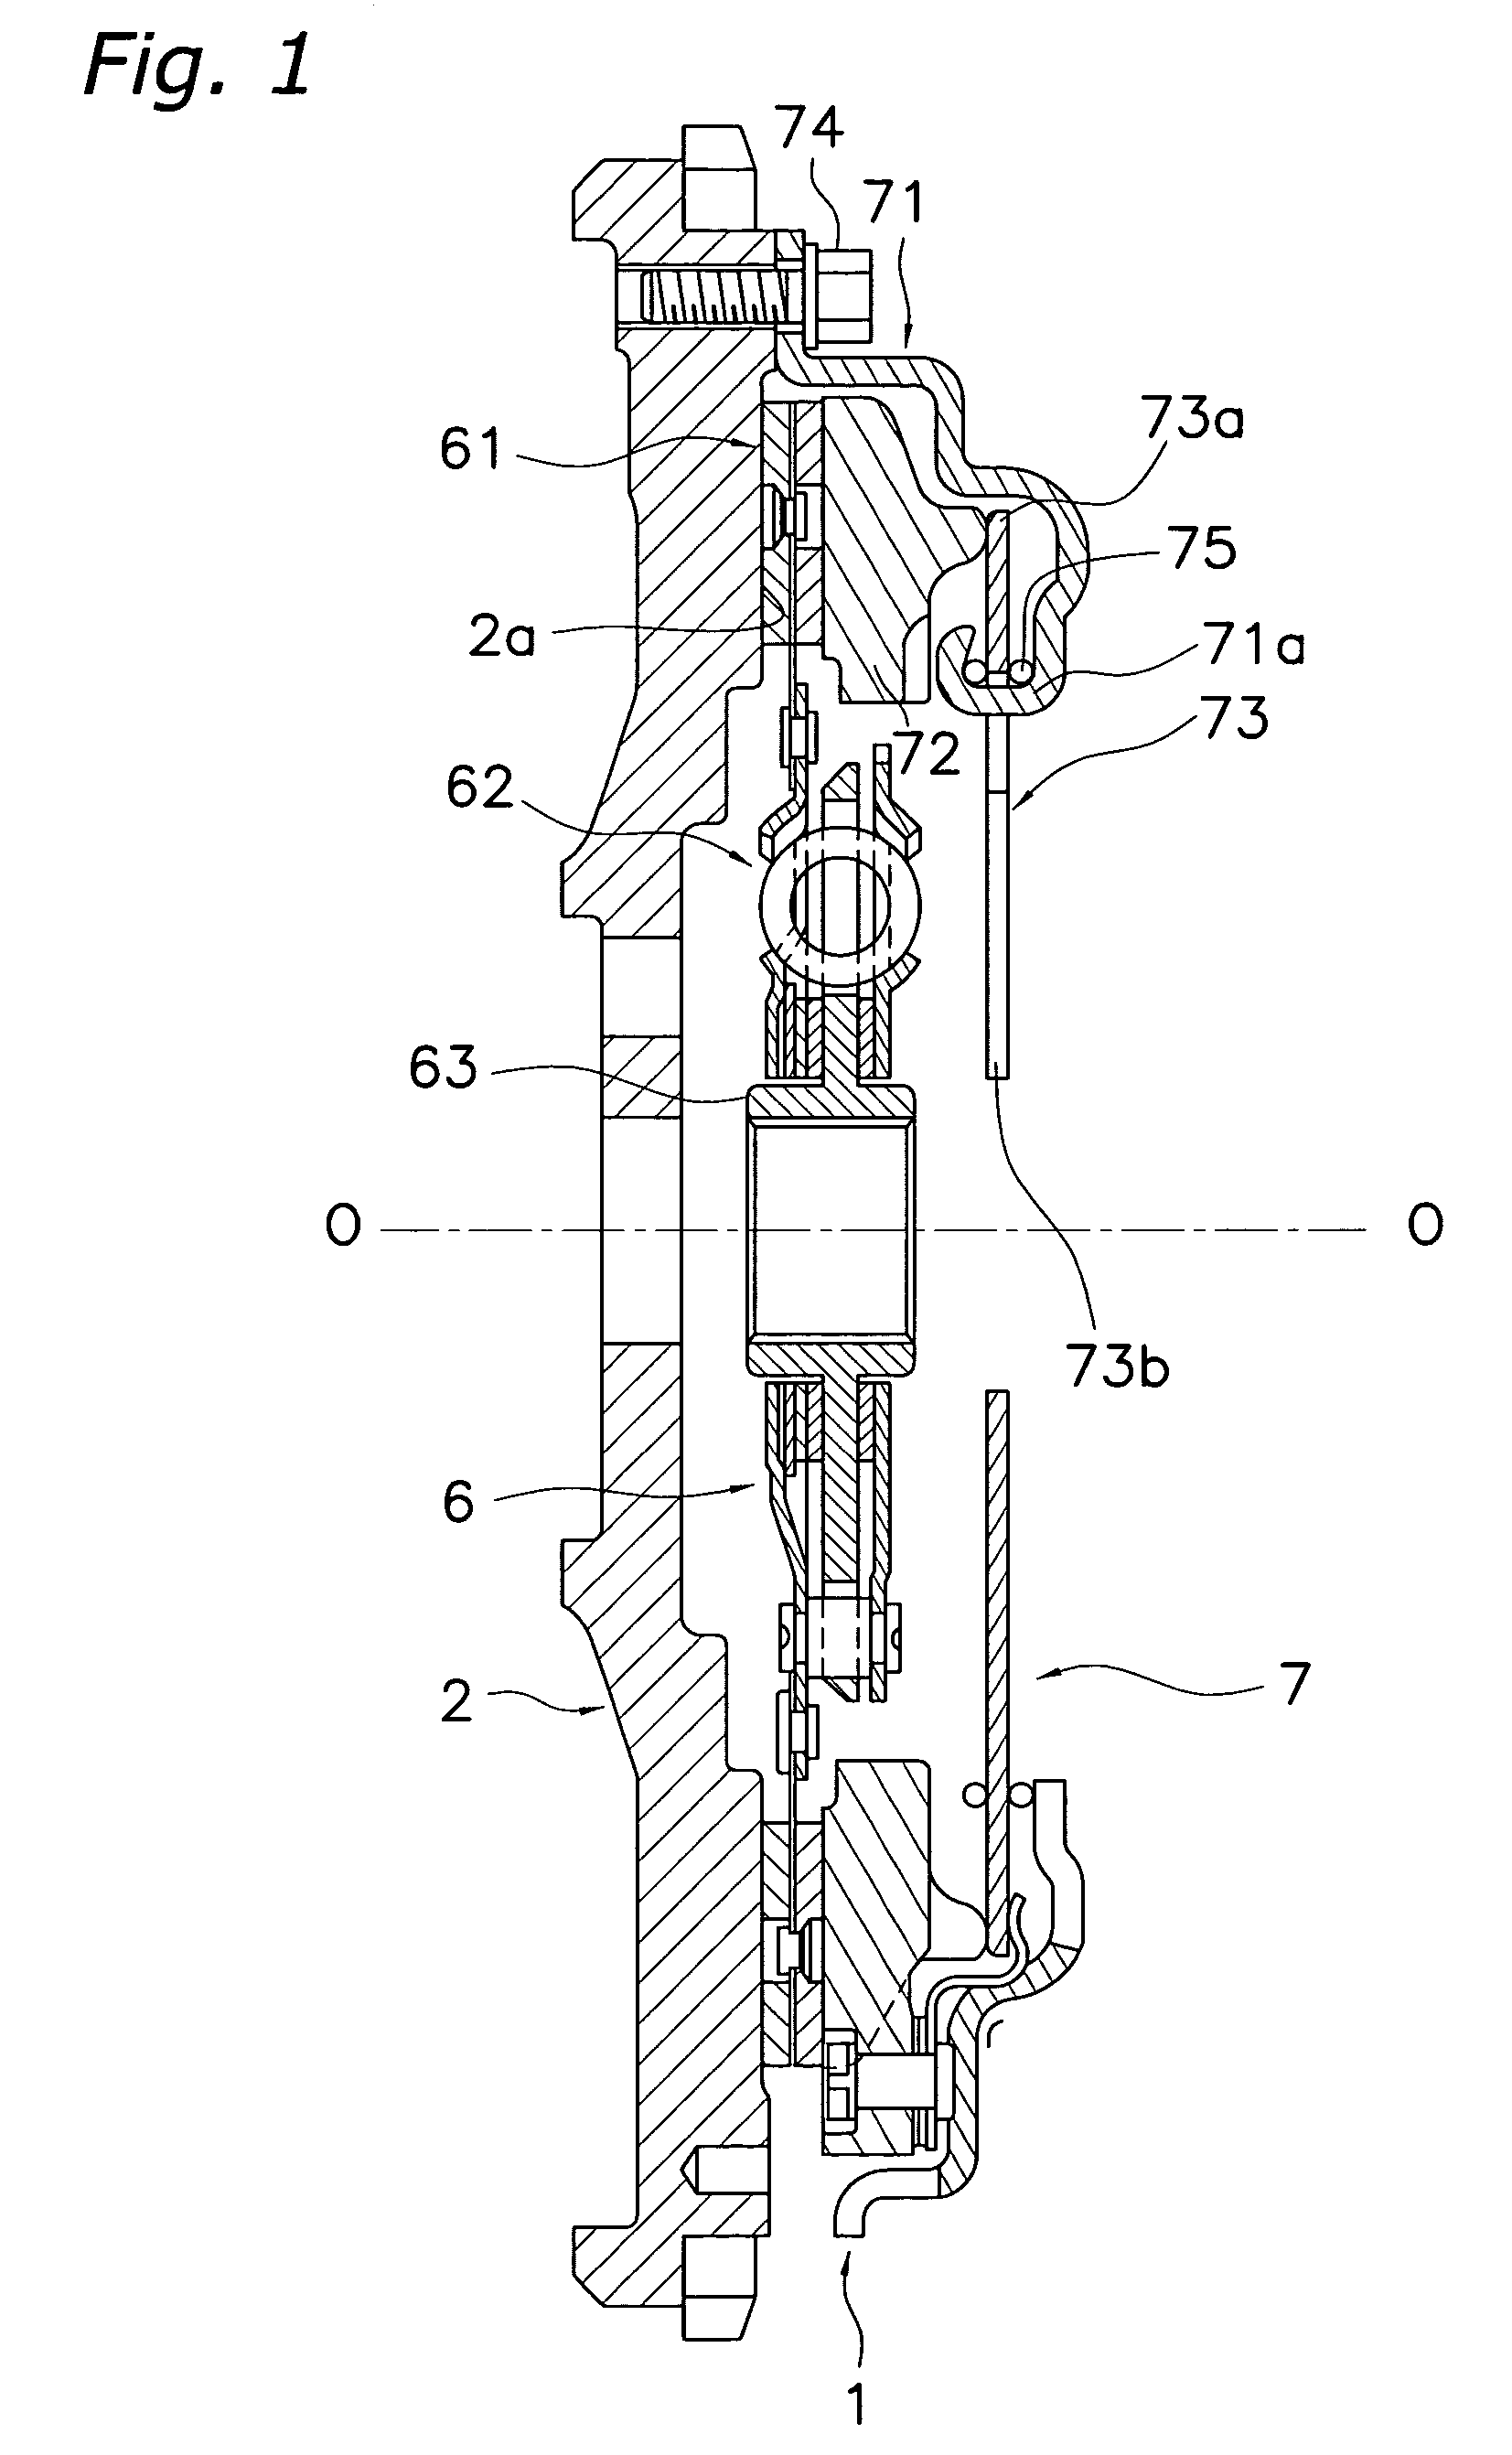 Method of producing a plate spring